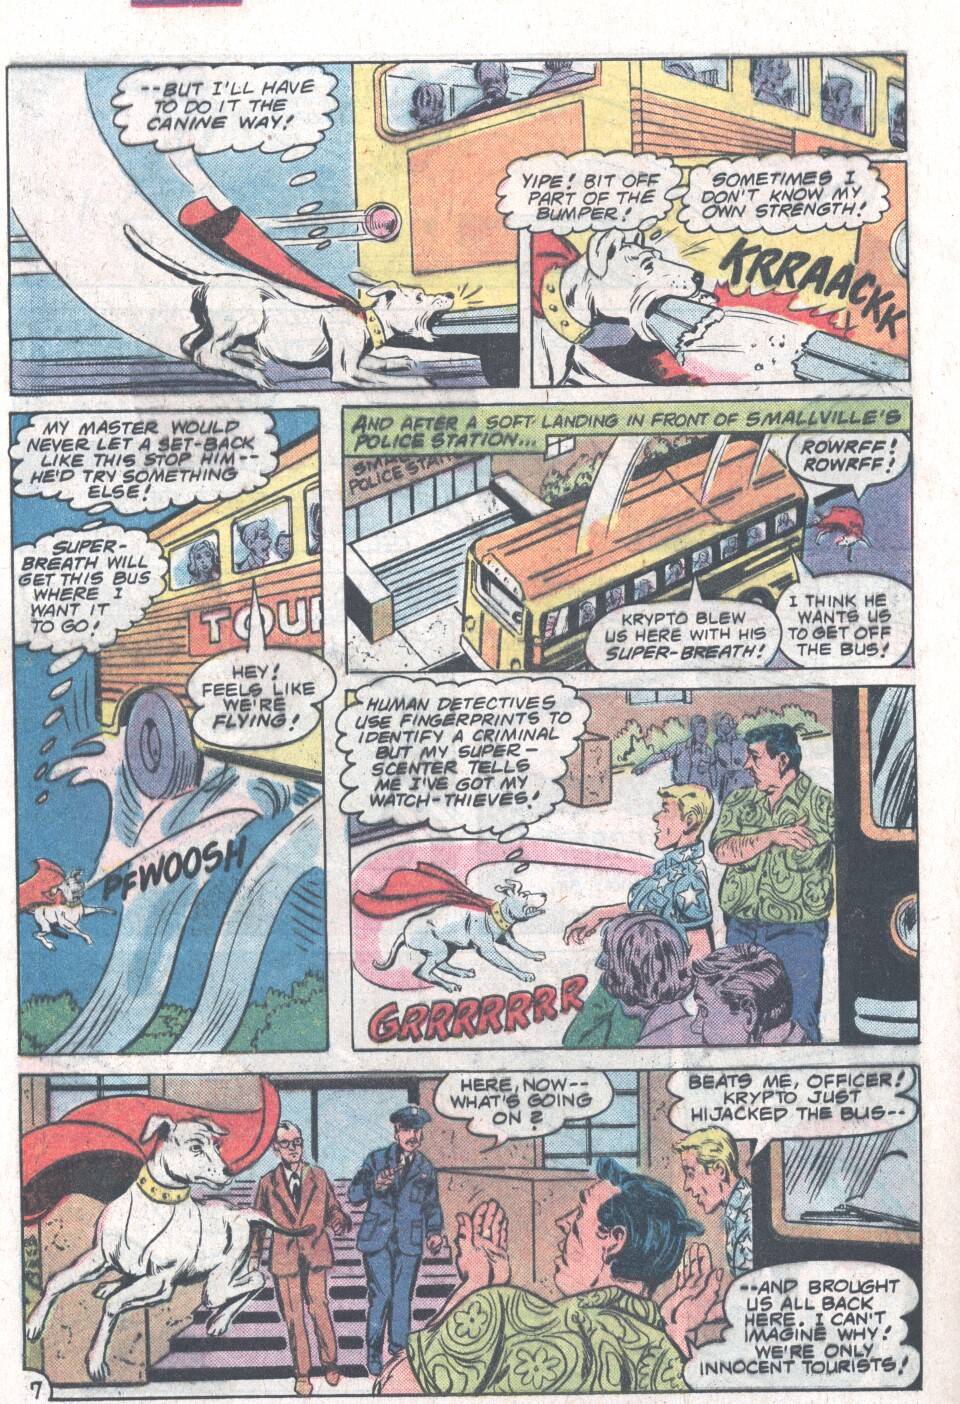 The New Adventures of Superboy 10 Page 24